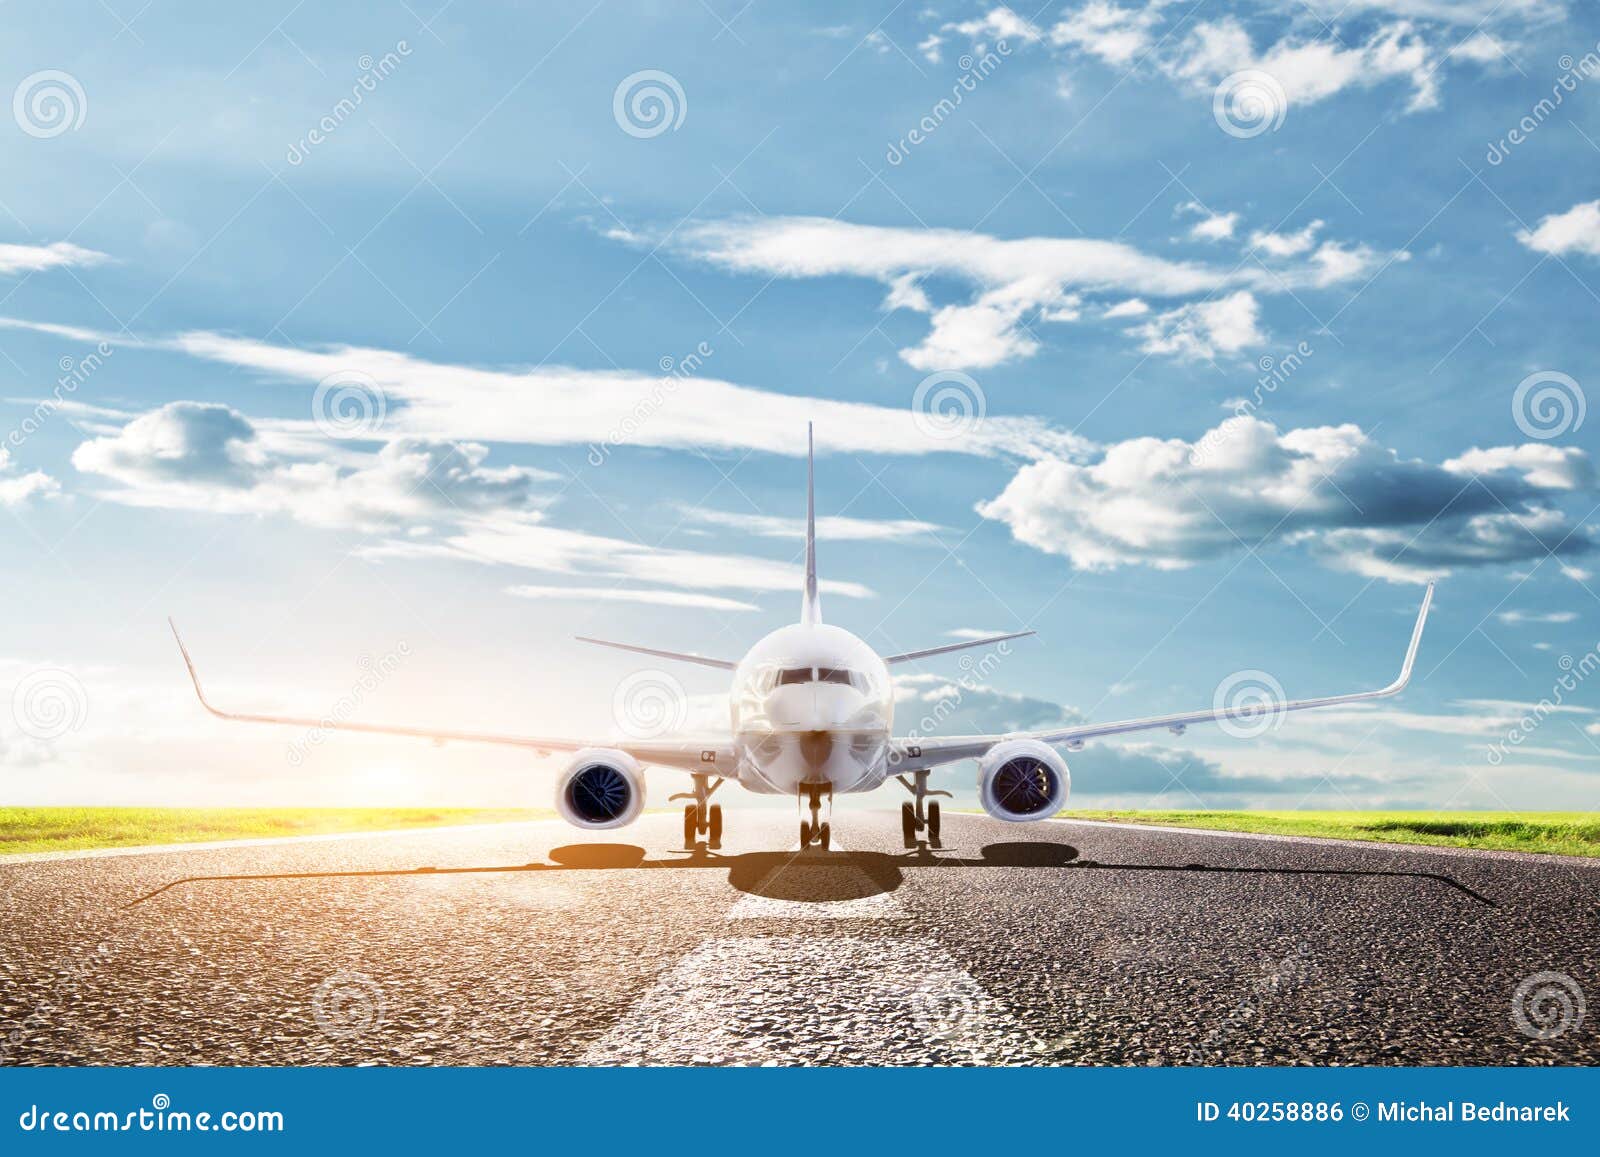 airplane ready to take off. passenger aircraft, airline. transport, travel